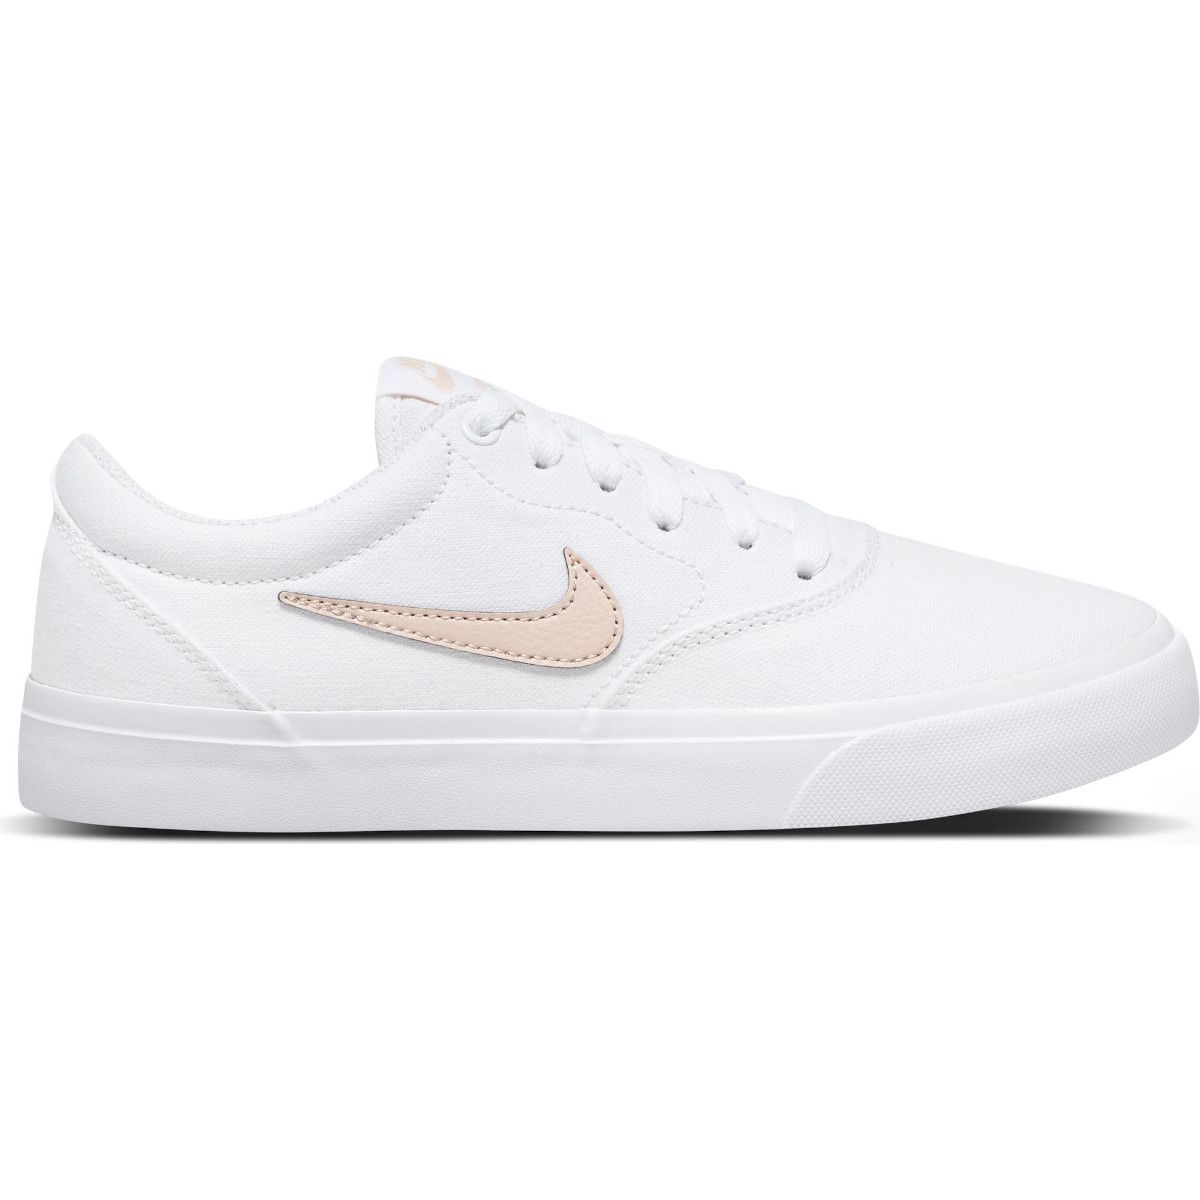 Nike SB Charge Canvas Women's Sport Shoes CN5269-101